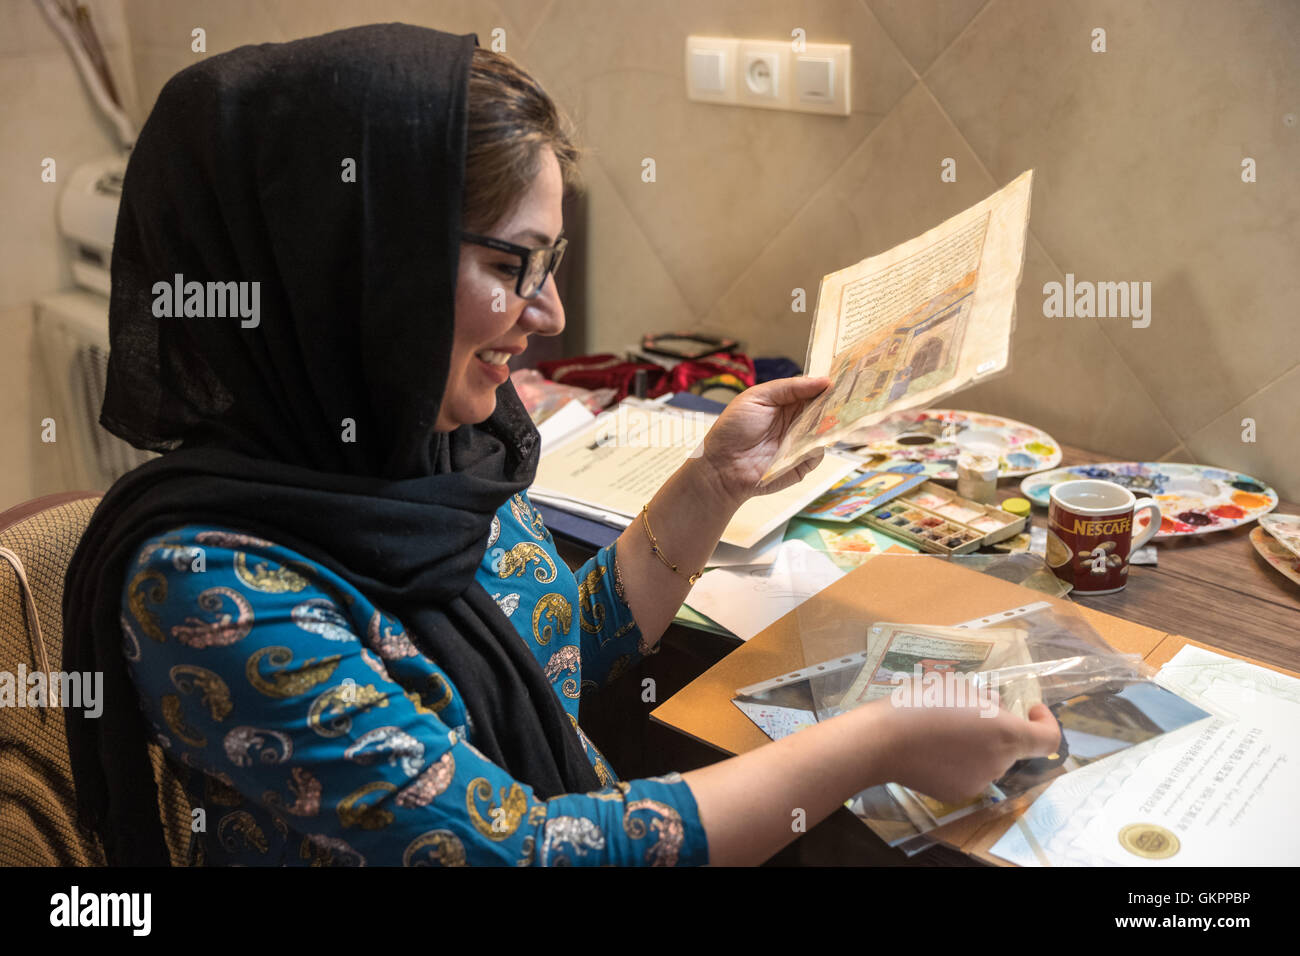 Narsrin Bateni is an award winning miniaturist specializing in traditional Persian miniature paintings in her workshop in Isfahan, Iran. Stock Photo